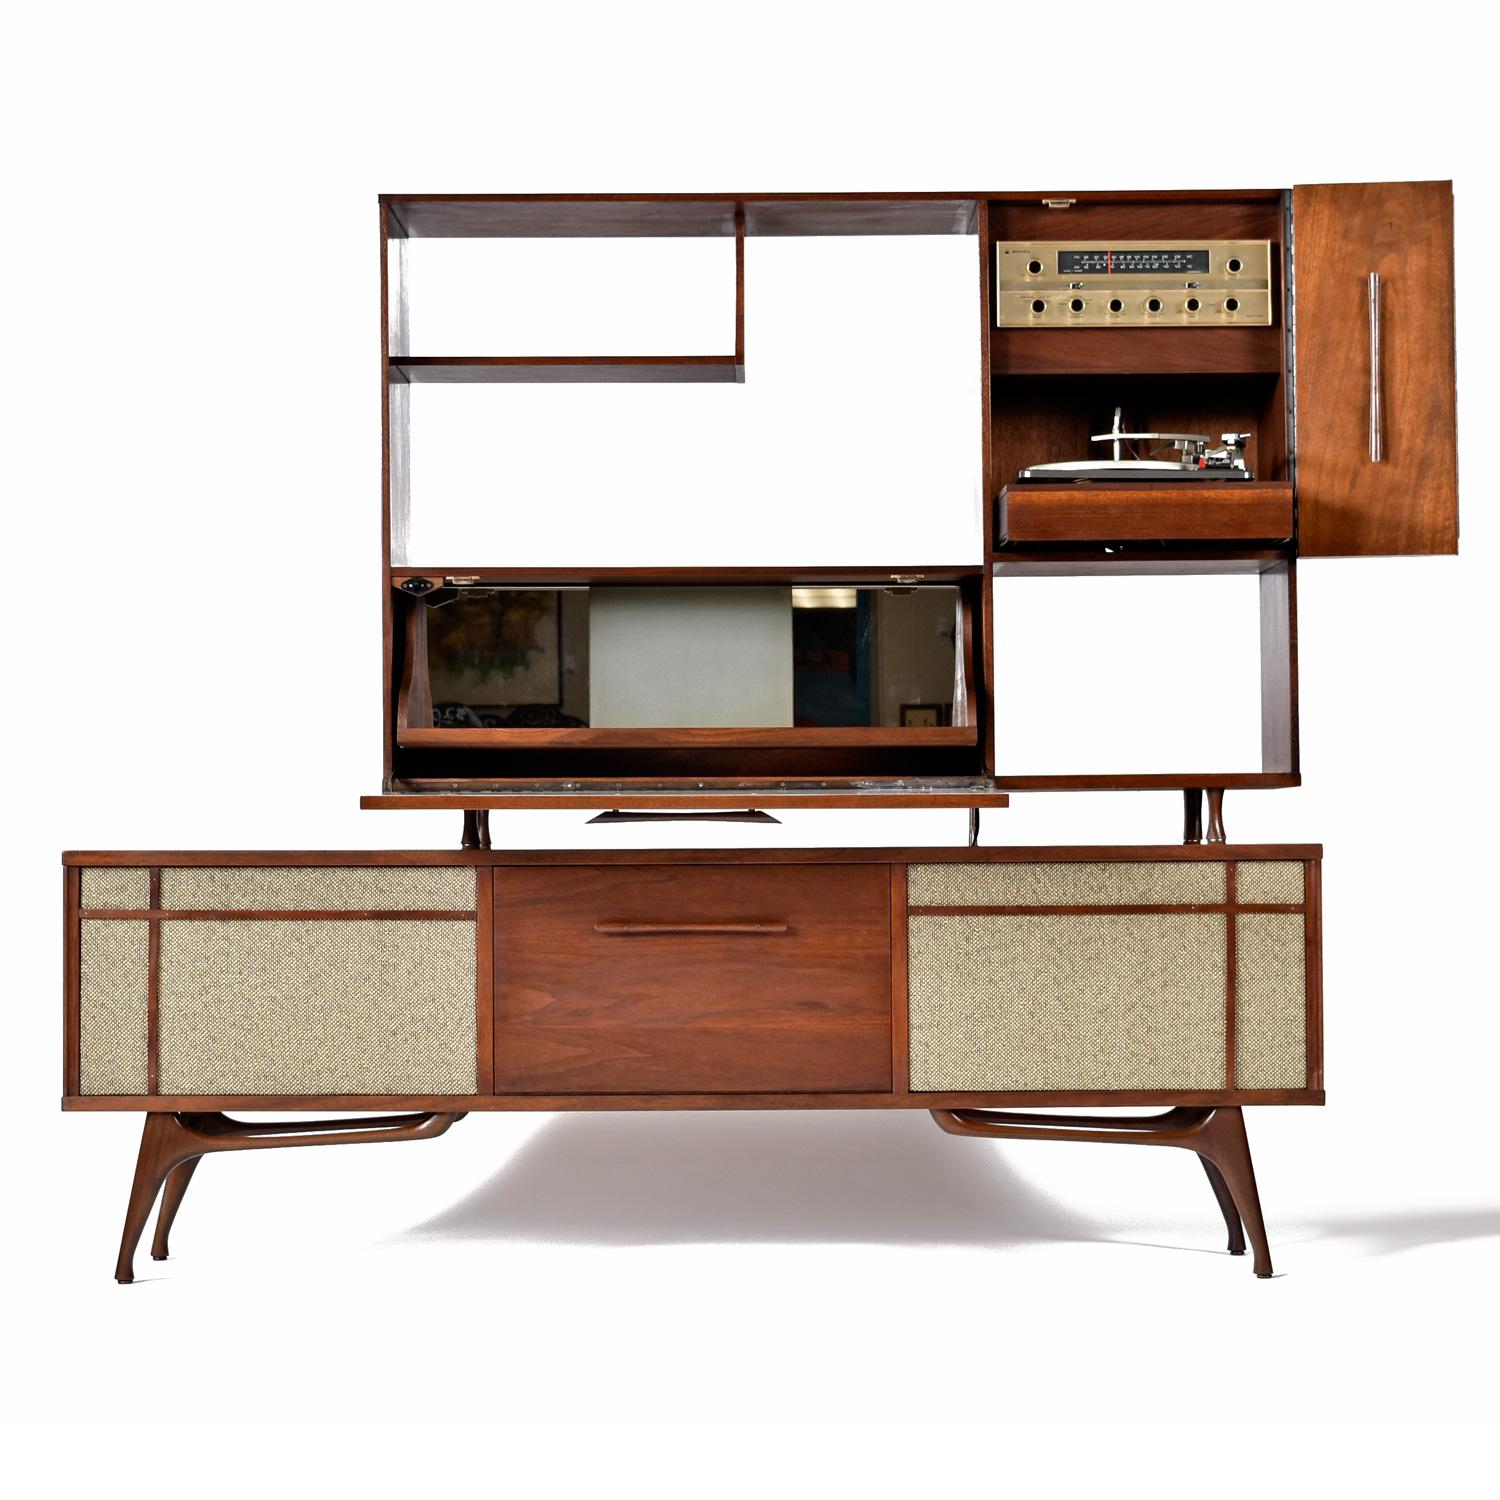 Frank, Dean and Sammy called. They want their stereo bar back.

First, let's talk about these awesome cabinets, then we'll move on to the professionally restored, original audio components and incredible sound. Please believe me when I say